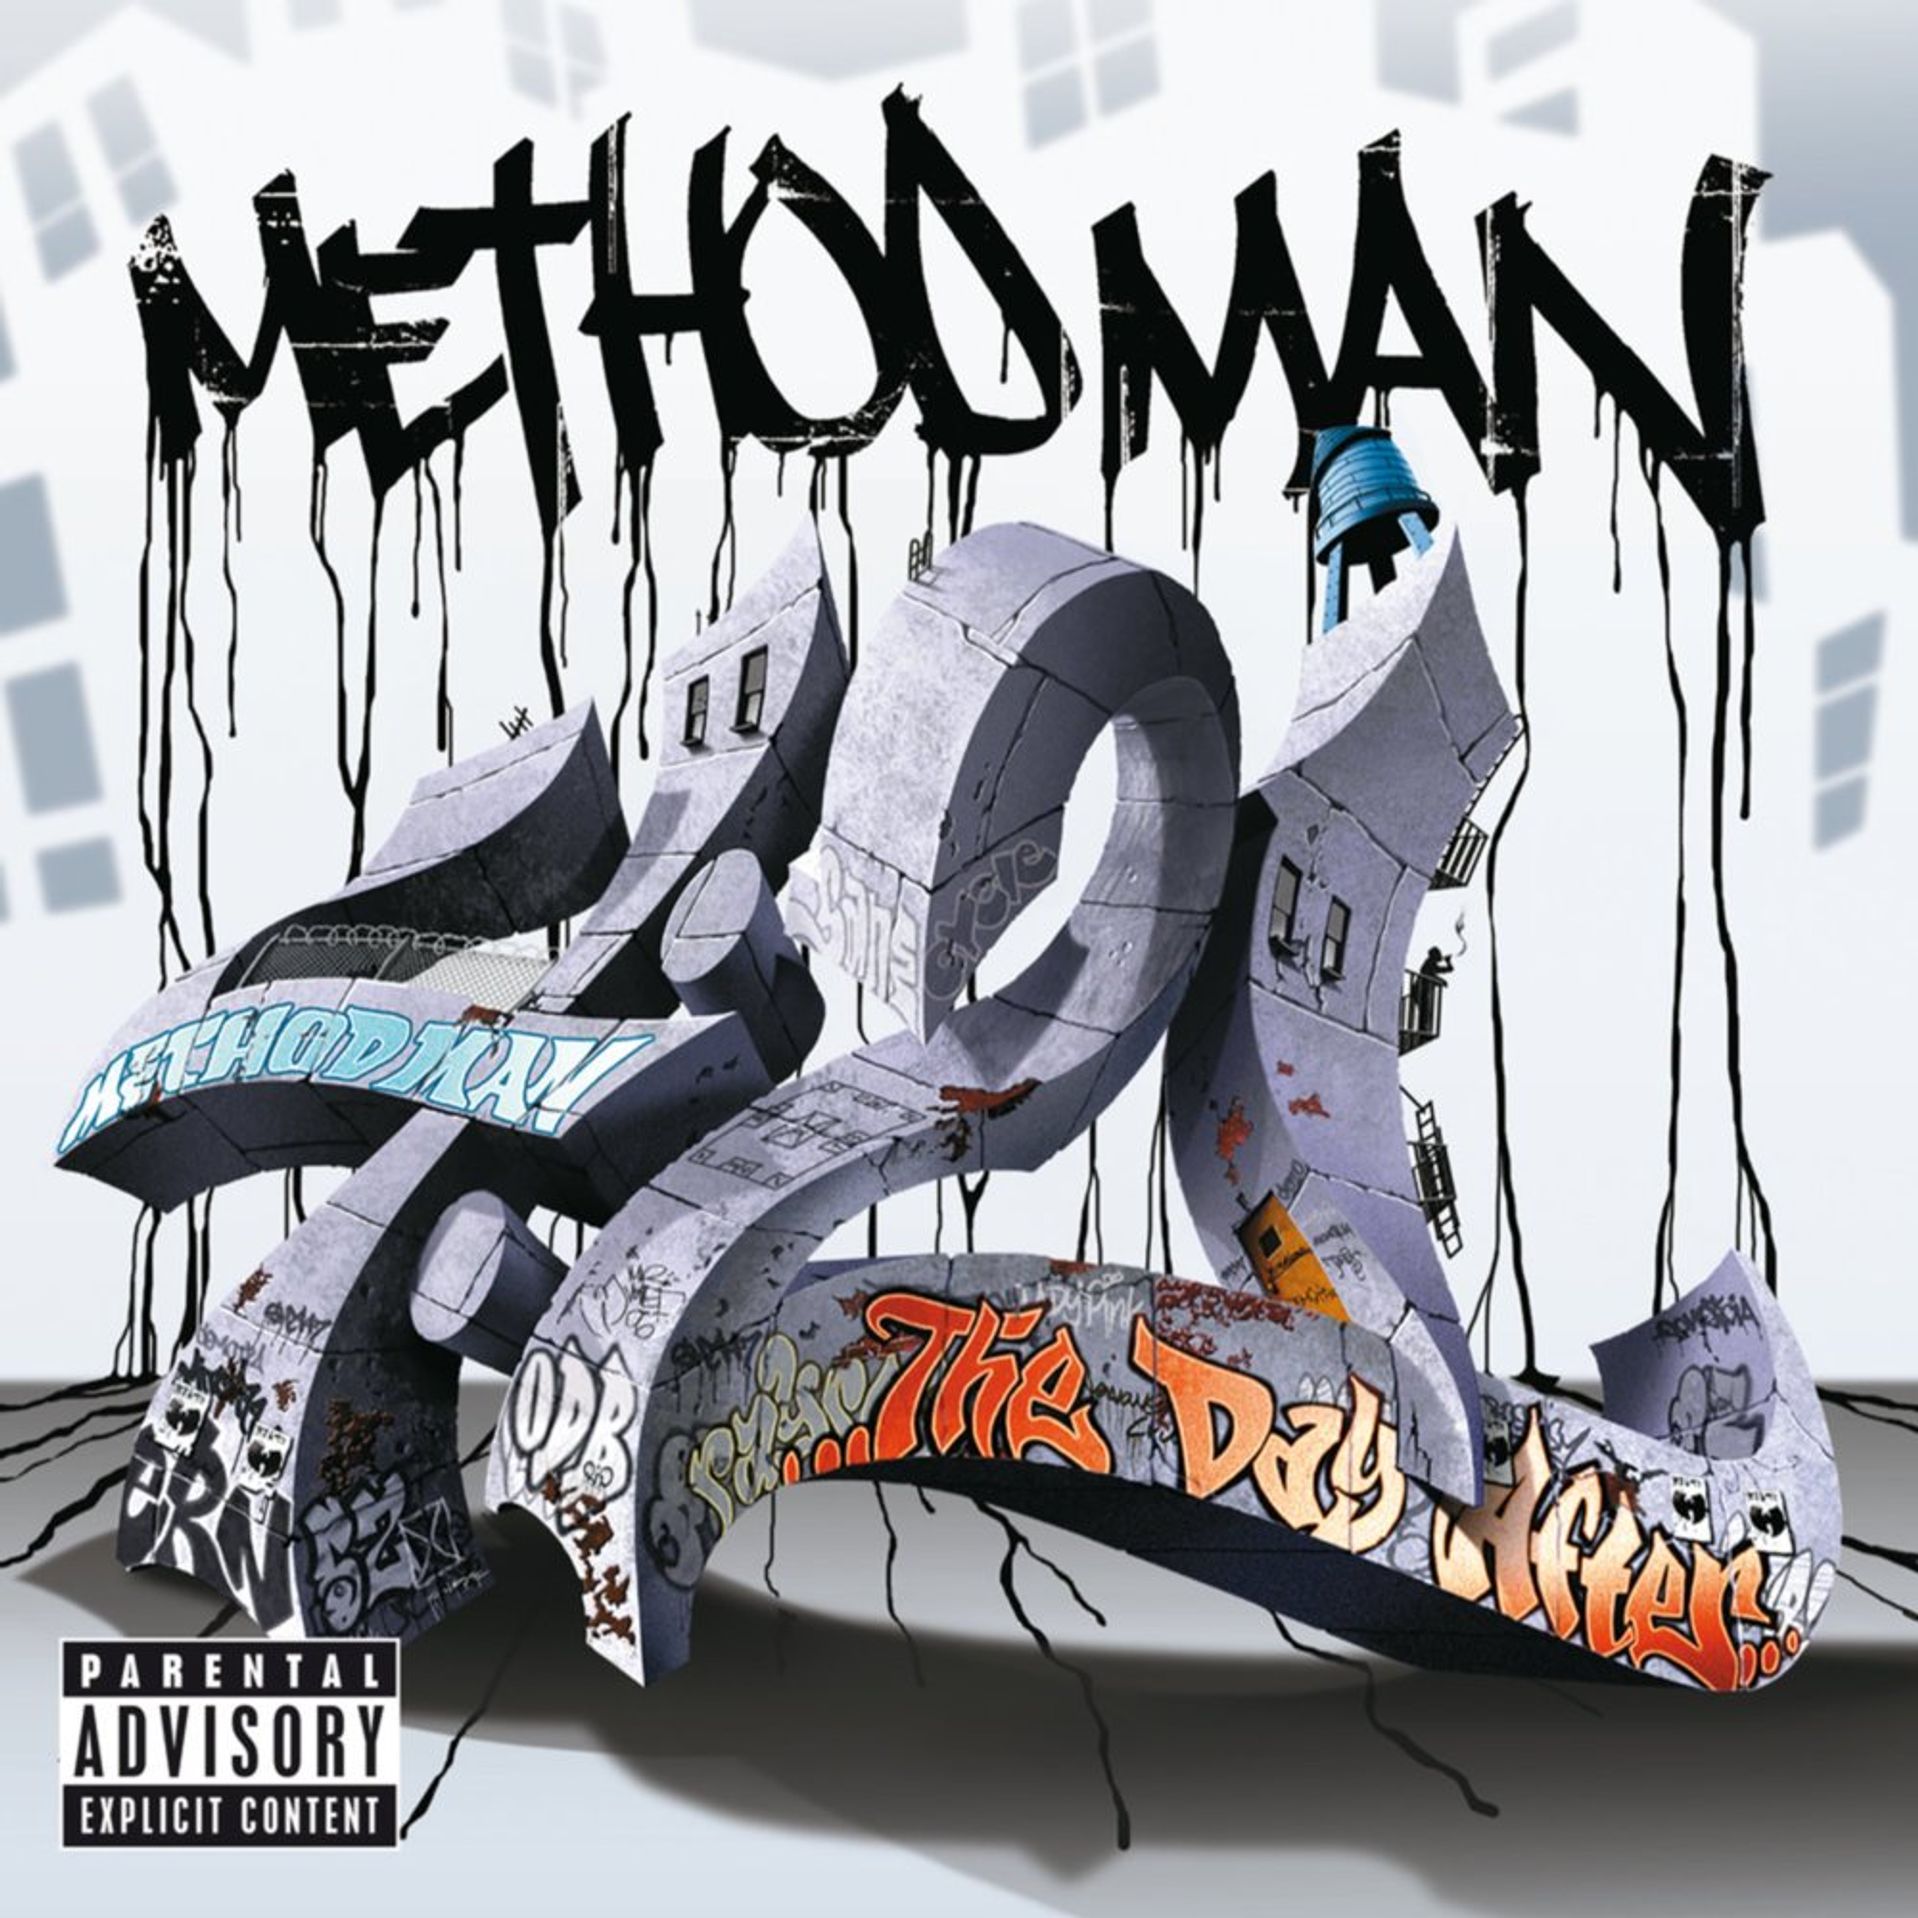 Album Title: 4:21... The Day After by: Method Man